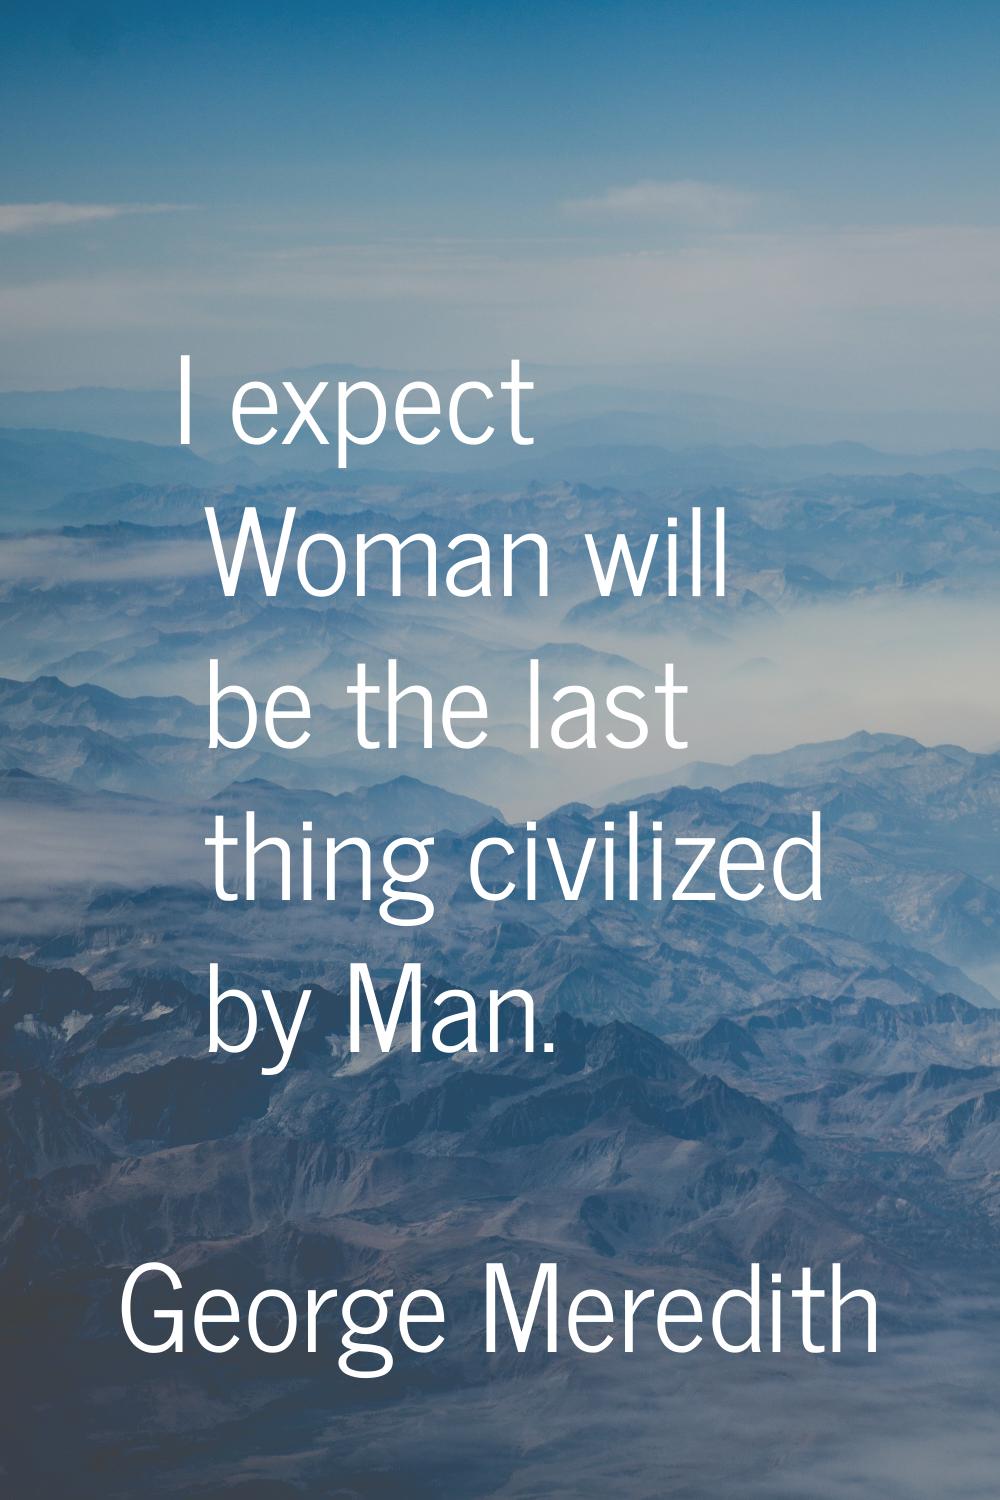 I expect Woman will be the last thing civilized by Man.